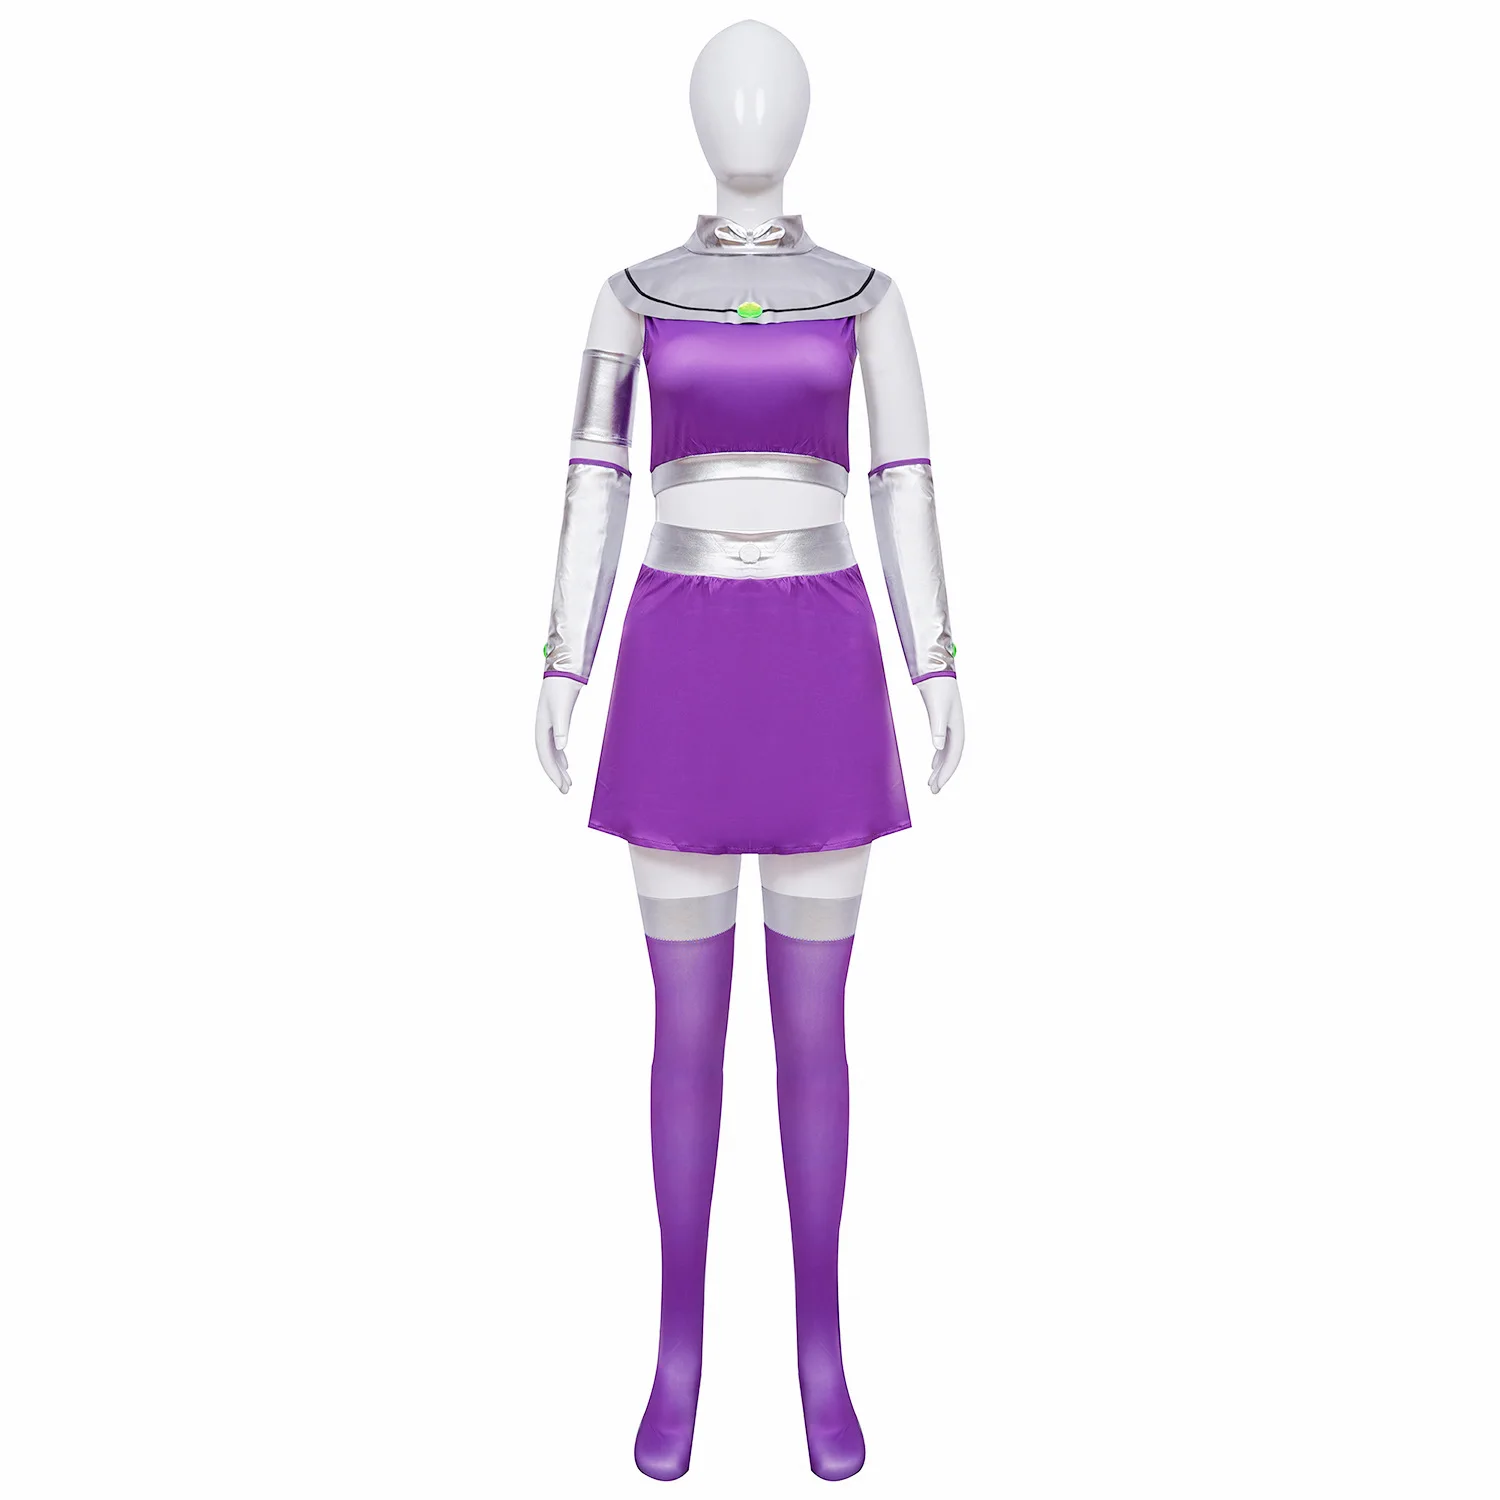 Anime Starfire Teen Titans Princess Koriand'r Cosplay Costume Purple Outfit with Stockings Women Halloween Carnival Uniform Suit